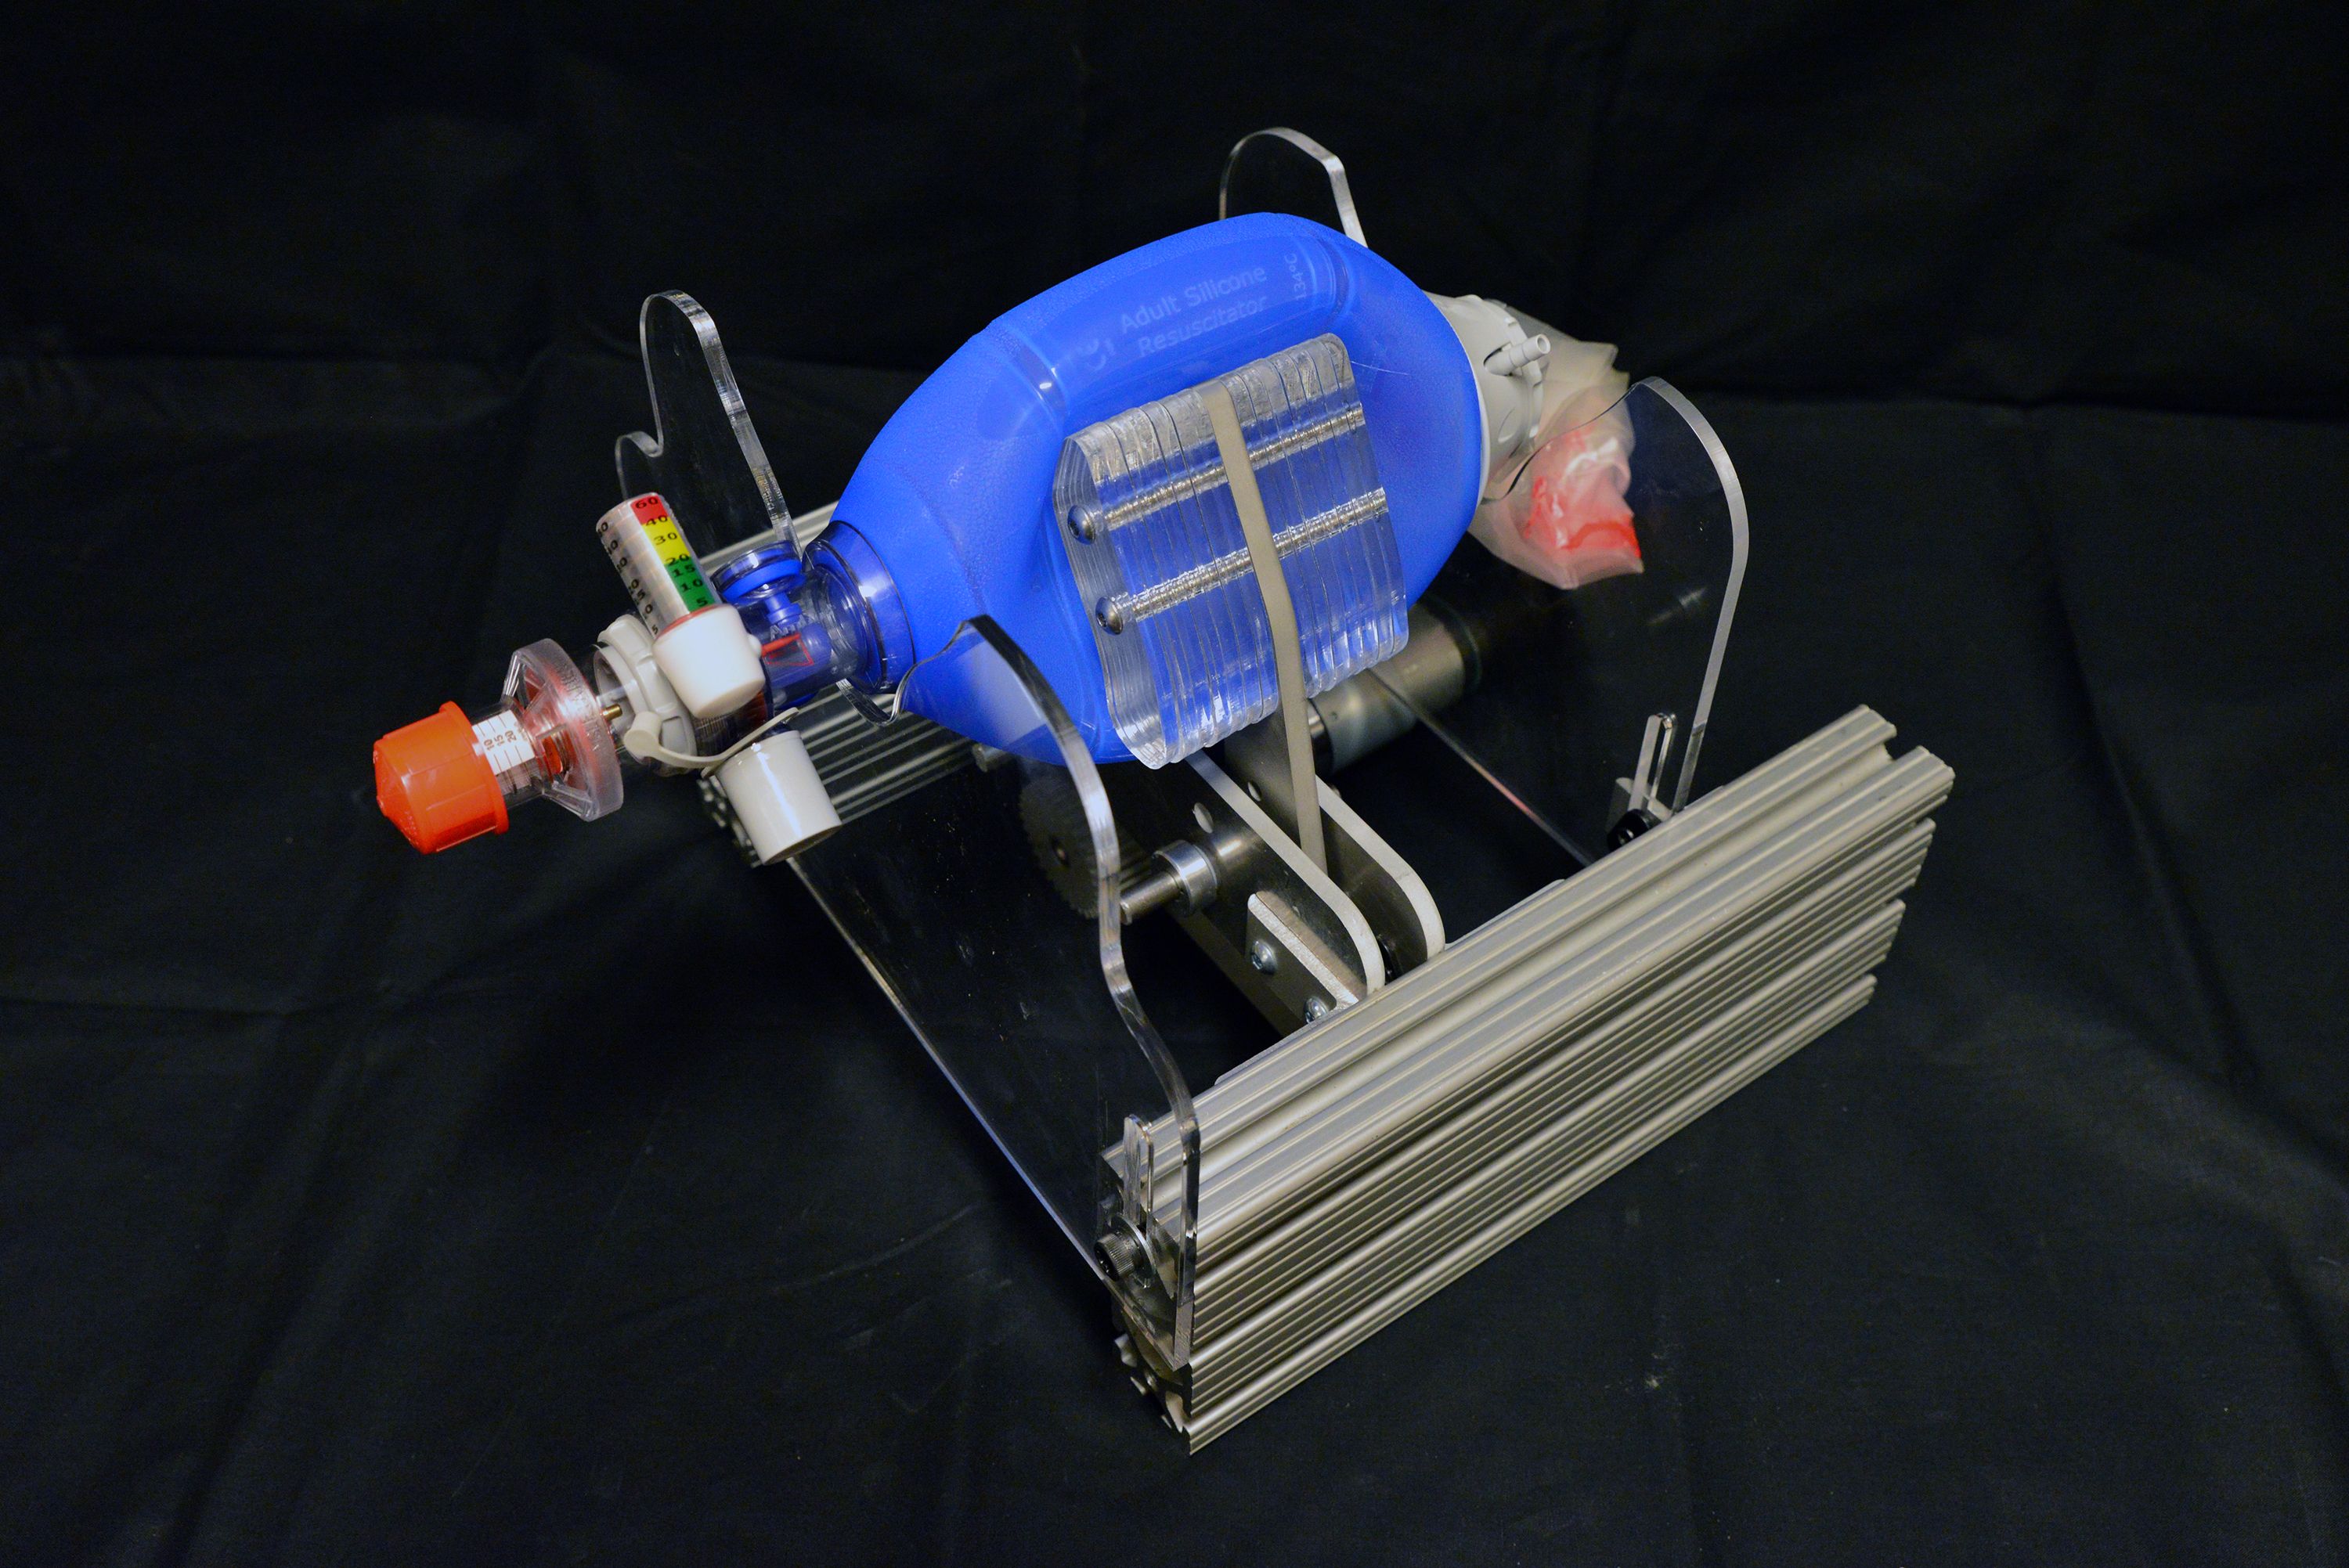 Mit Based Team Works On Rapid Deployment Of Open Source Low Cost Ventilator Mit News Massachusetts Institute Of Technology